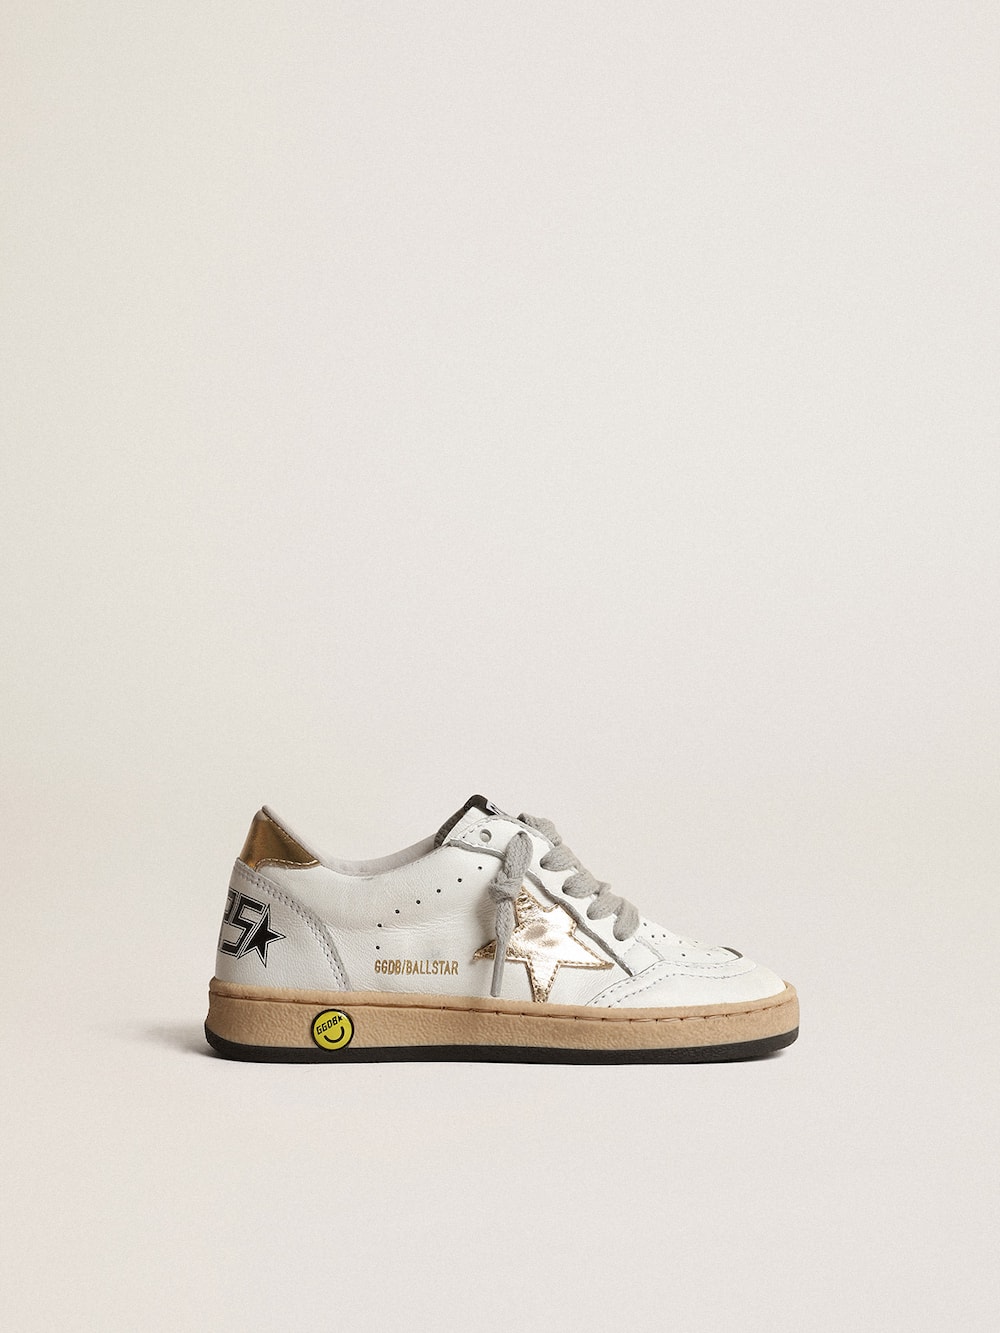 Golden Goose - Ball Star Young with gold metallic leather star and heel tab in 